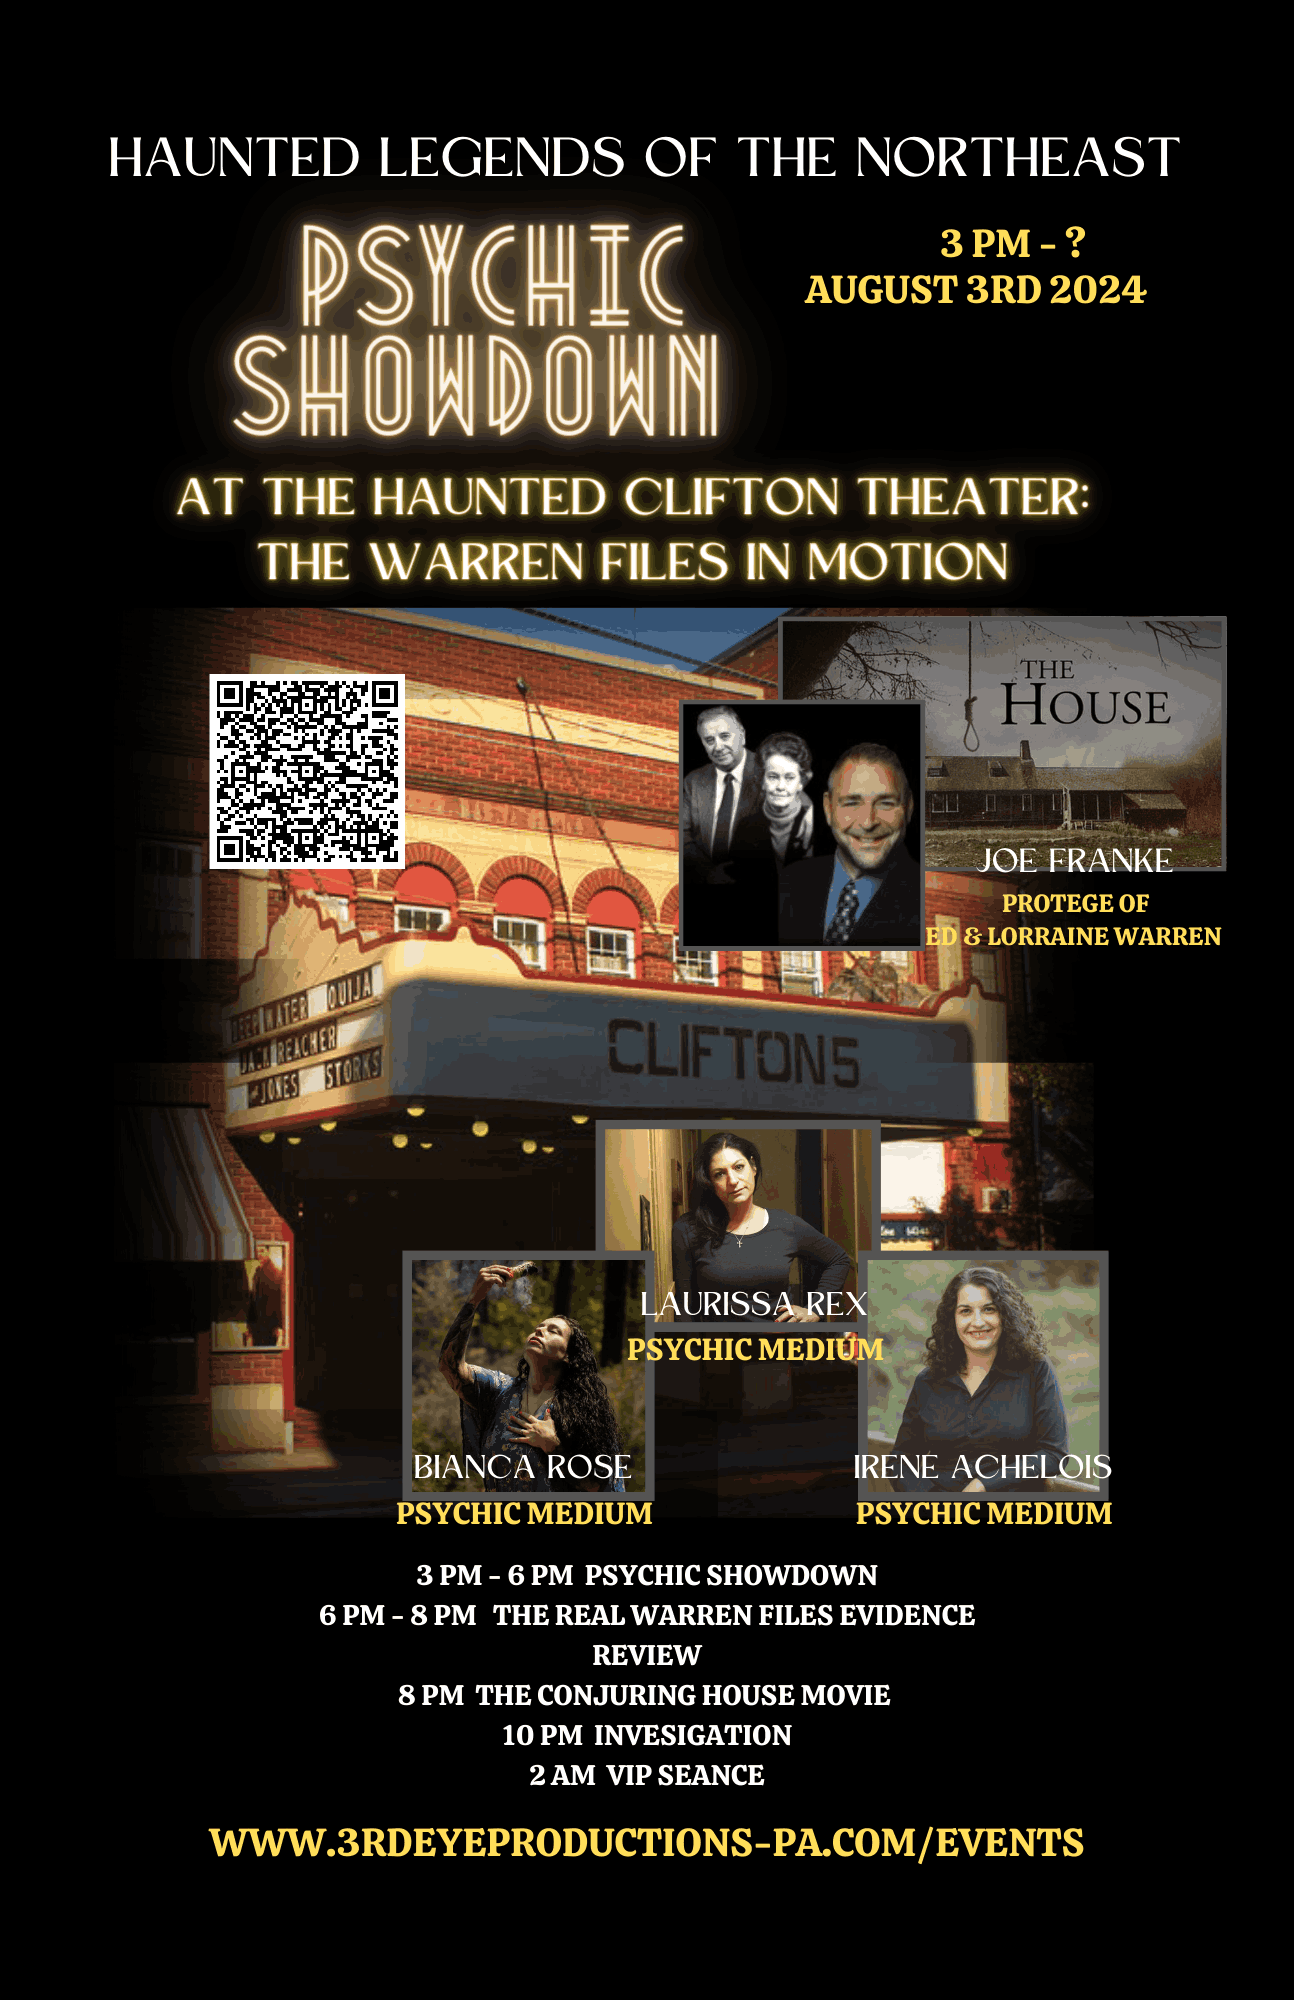 Haunted Legends of the Northeast: Psychic Showdown at the Clifton Theater  on Aug 03, 17:00@The Haunted Clifton Theater - Buy tickets and Get information on Third Eye Event Productions, L 